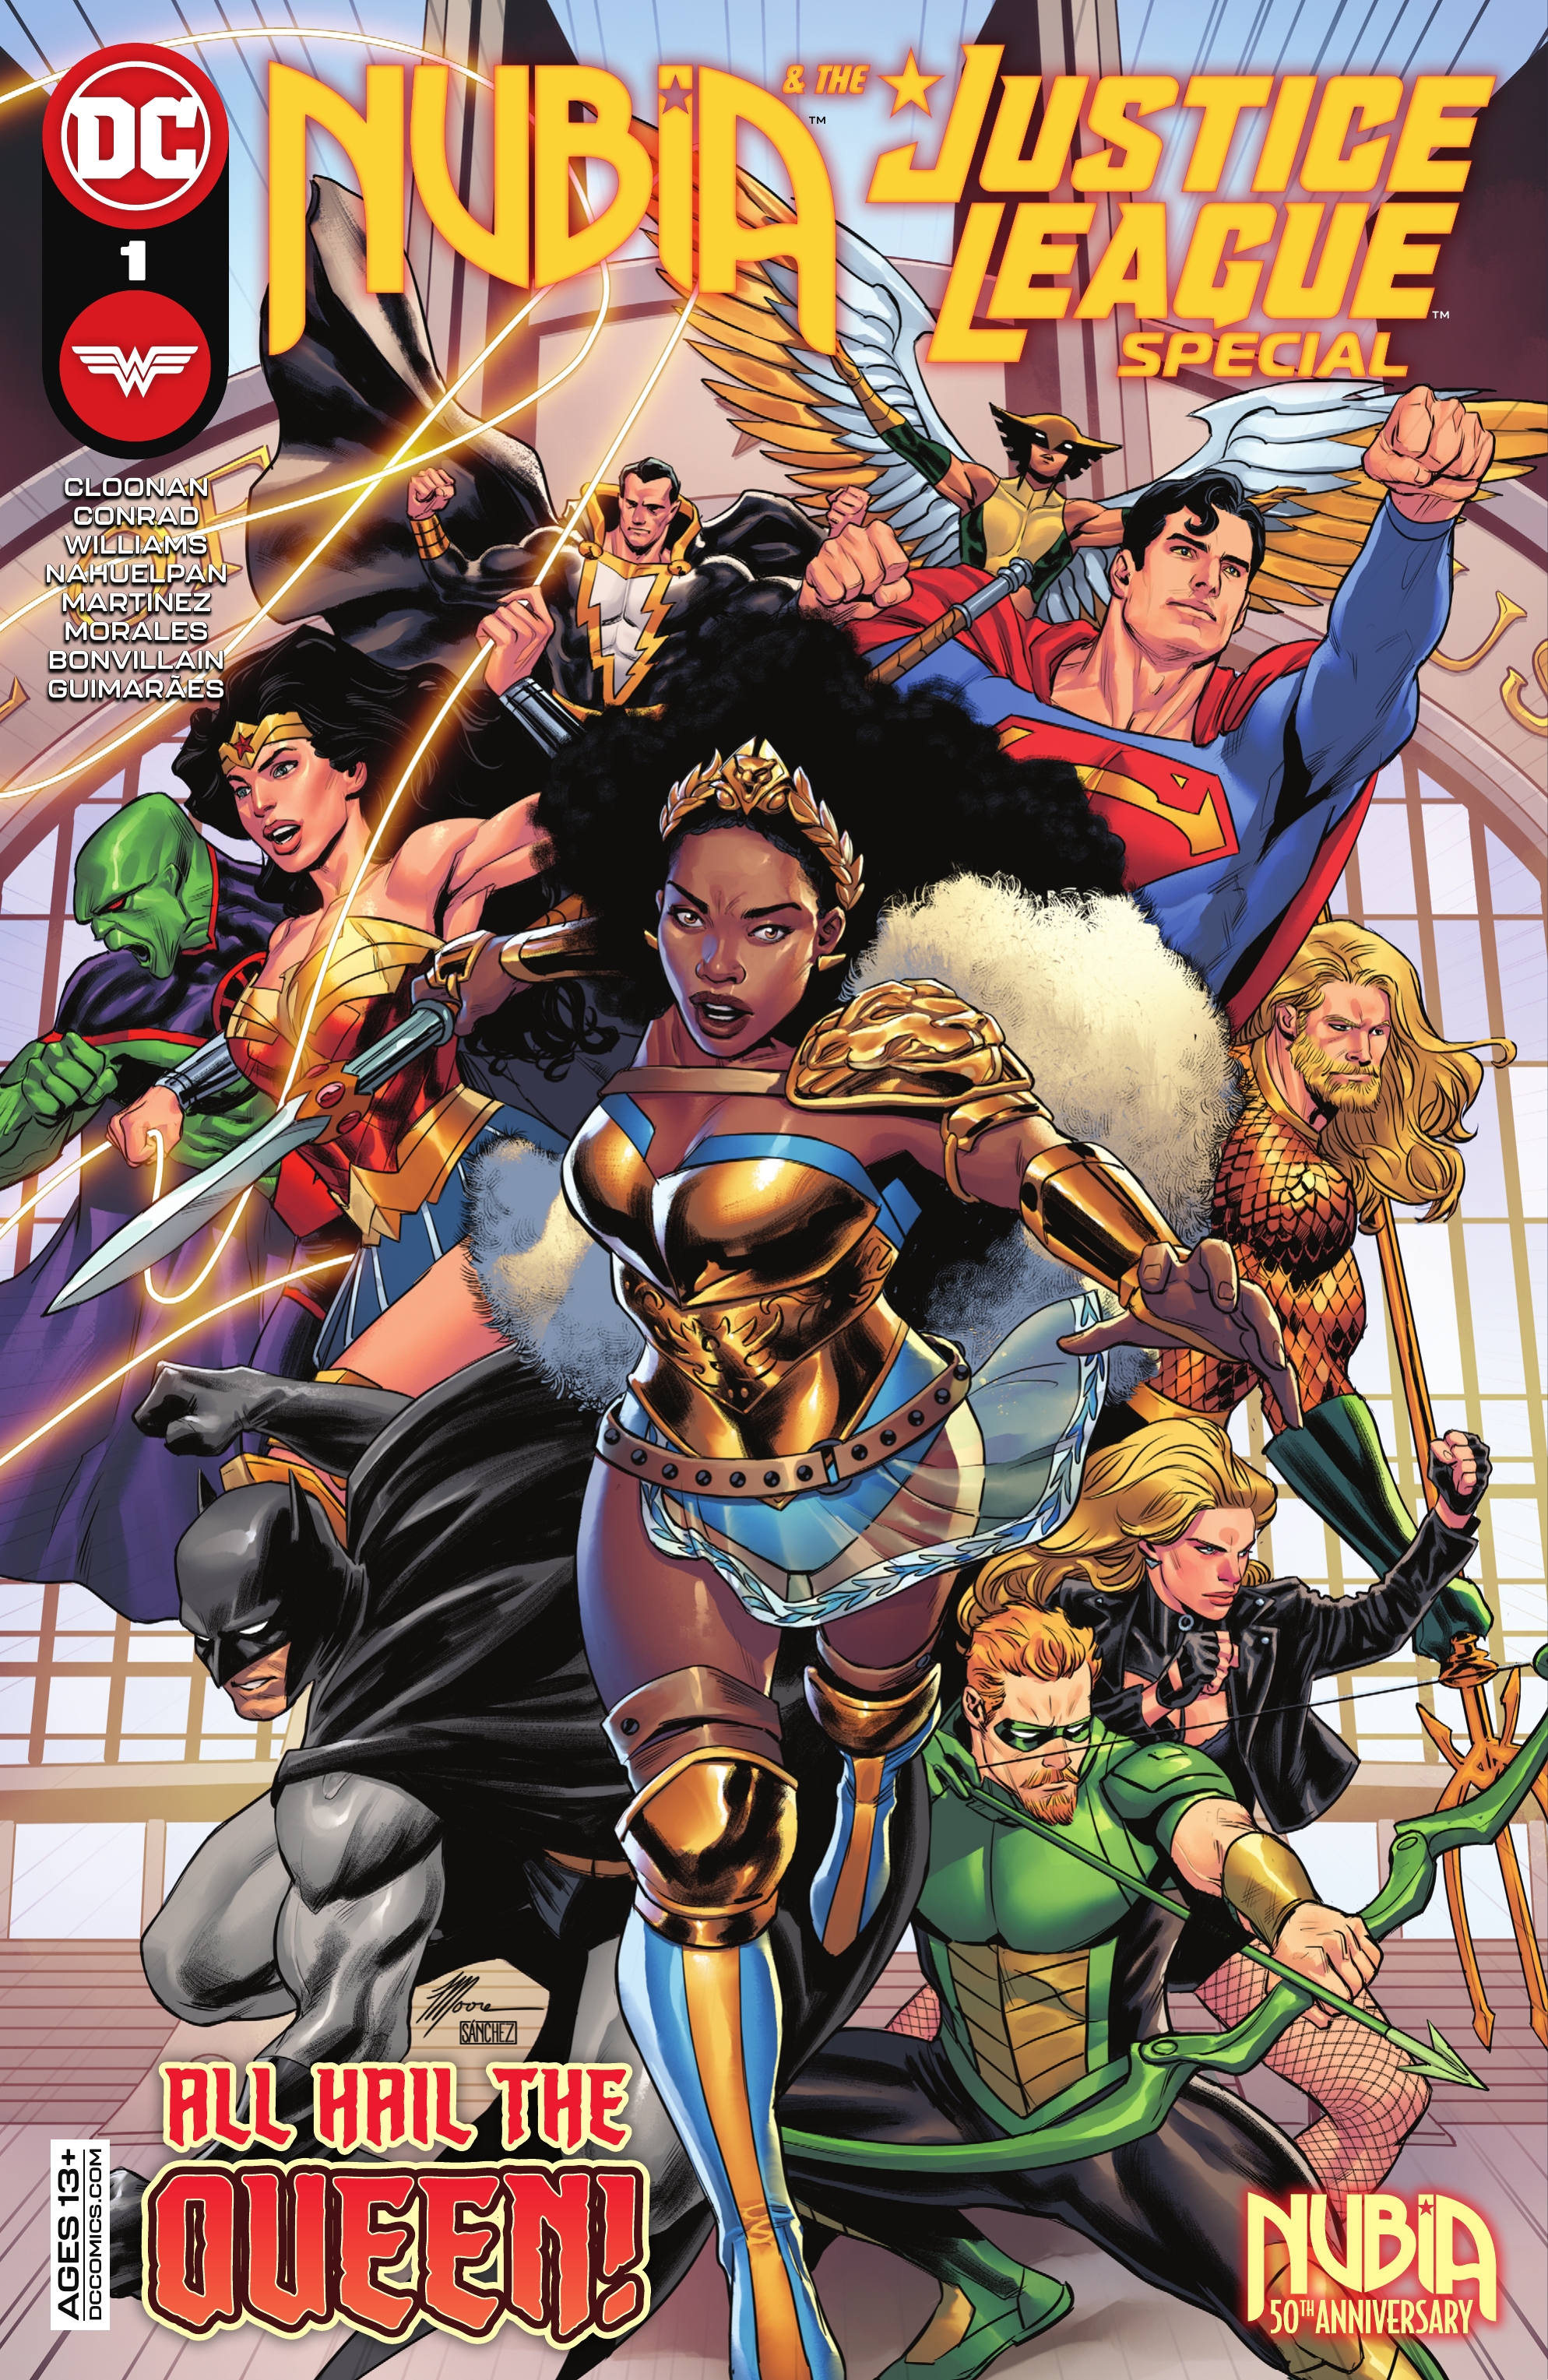 Read online Nubia and the Justice League Special comic -  Issue # Full - 1